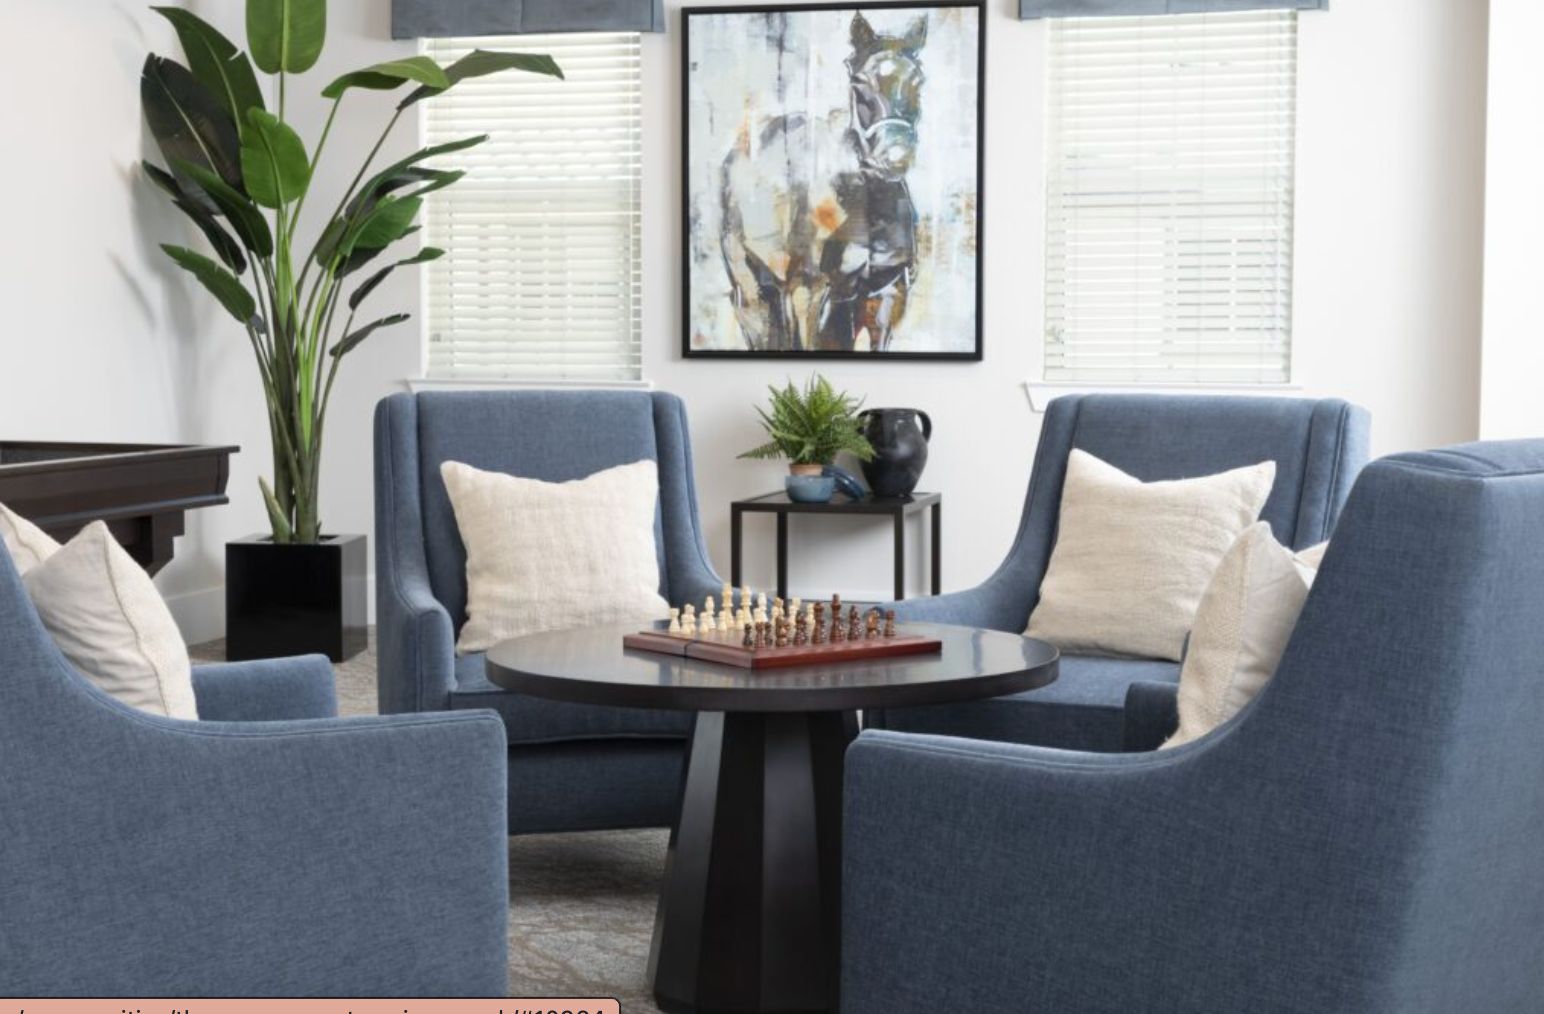 Senior living room interior at The Preserve at Spring Creek with home decor, furniture, and chess game.